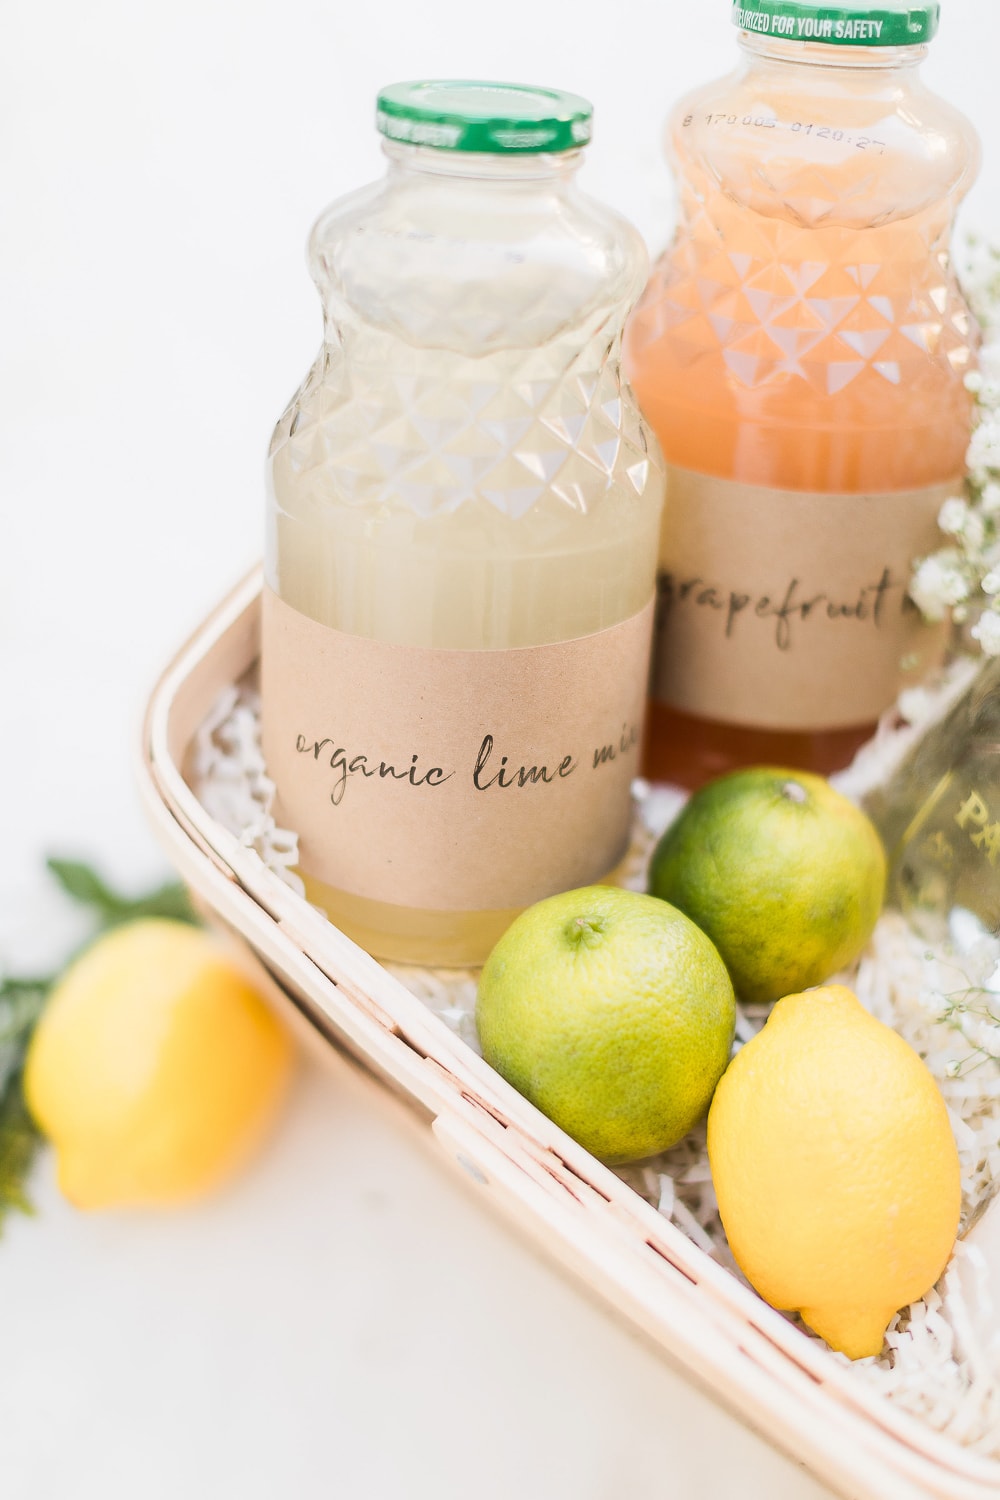 Margarita themed gift basket made by blogger Stephanie Ziajka on Diary of a Debutante